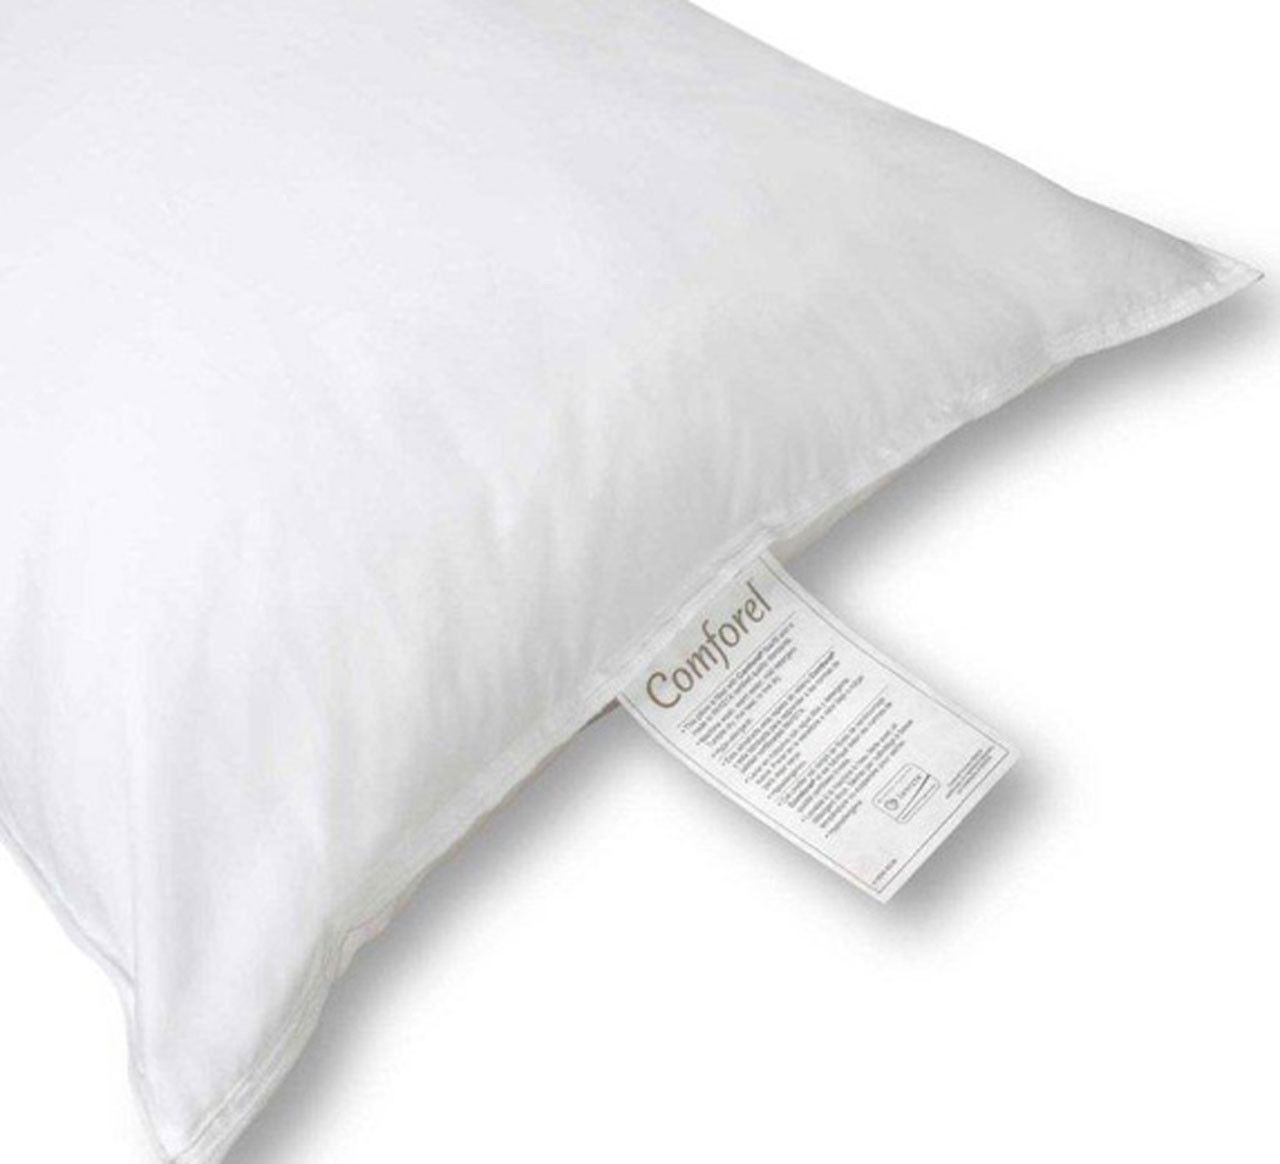 What type of support does this pillow offer?